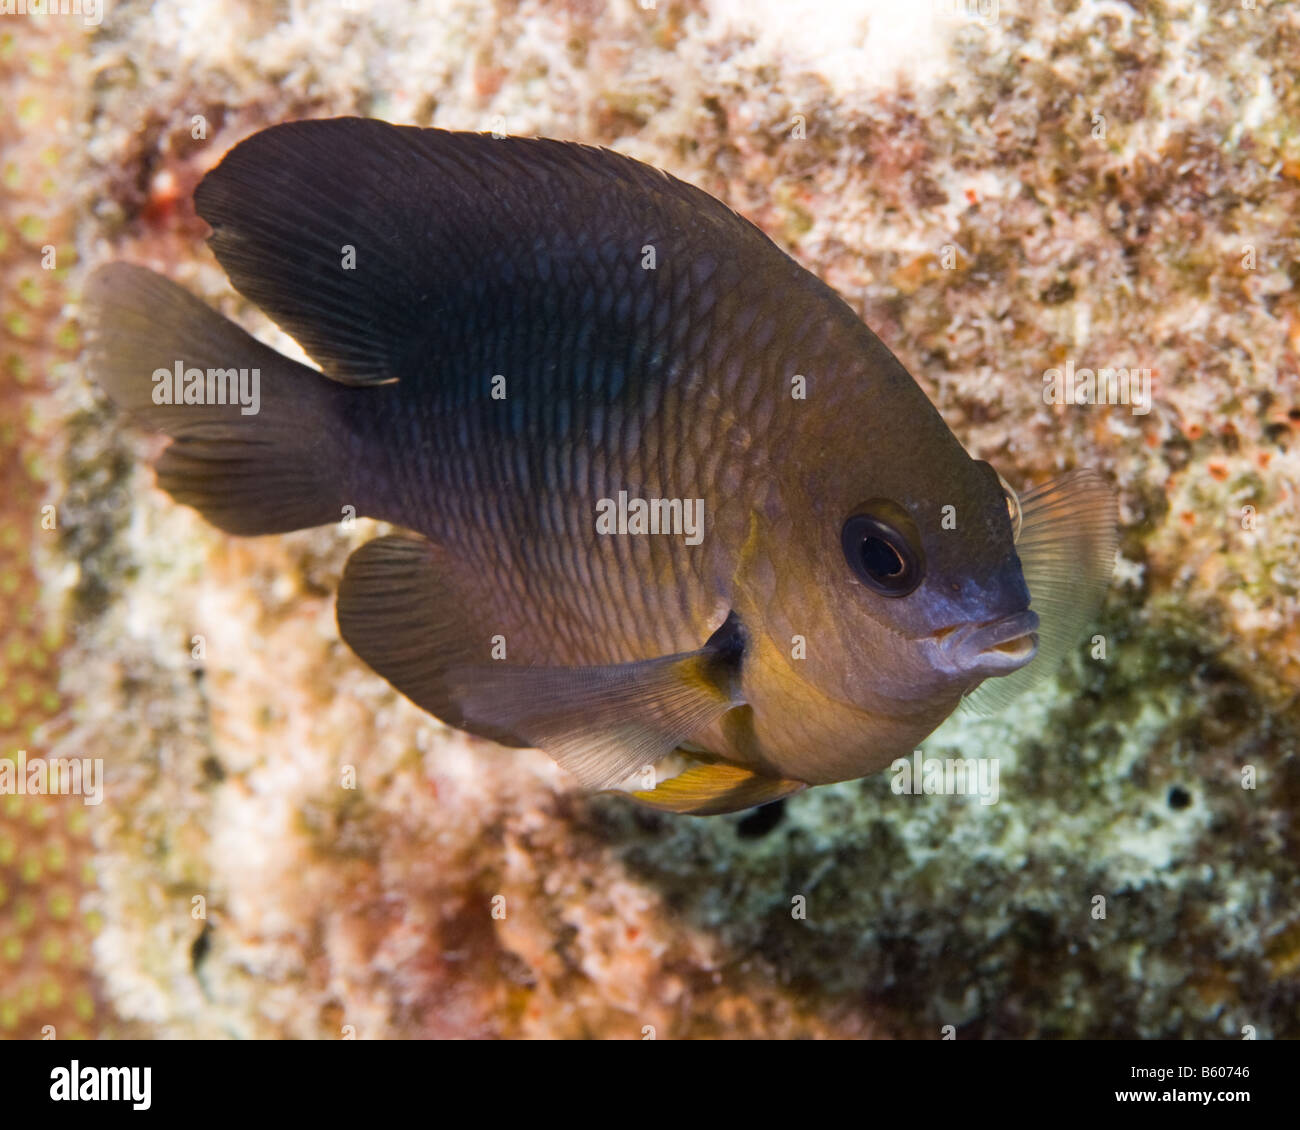 A Threspot Damselfish poses in side view for the camera. Stock Photo